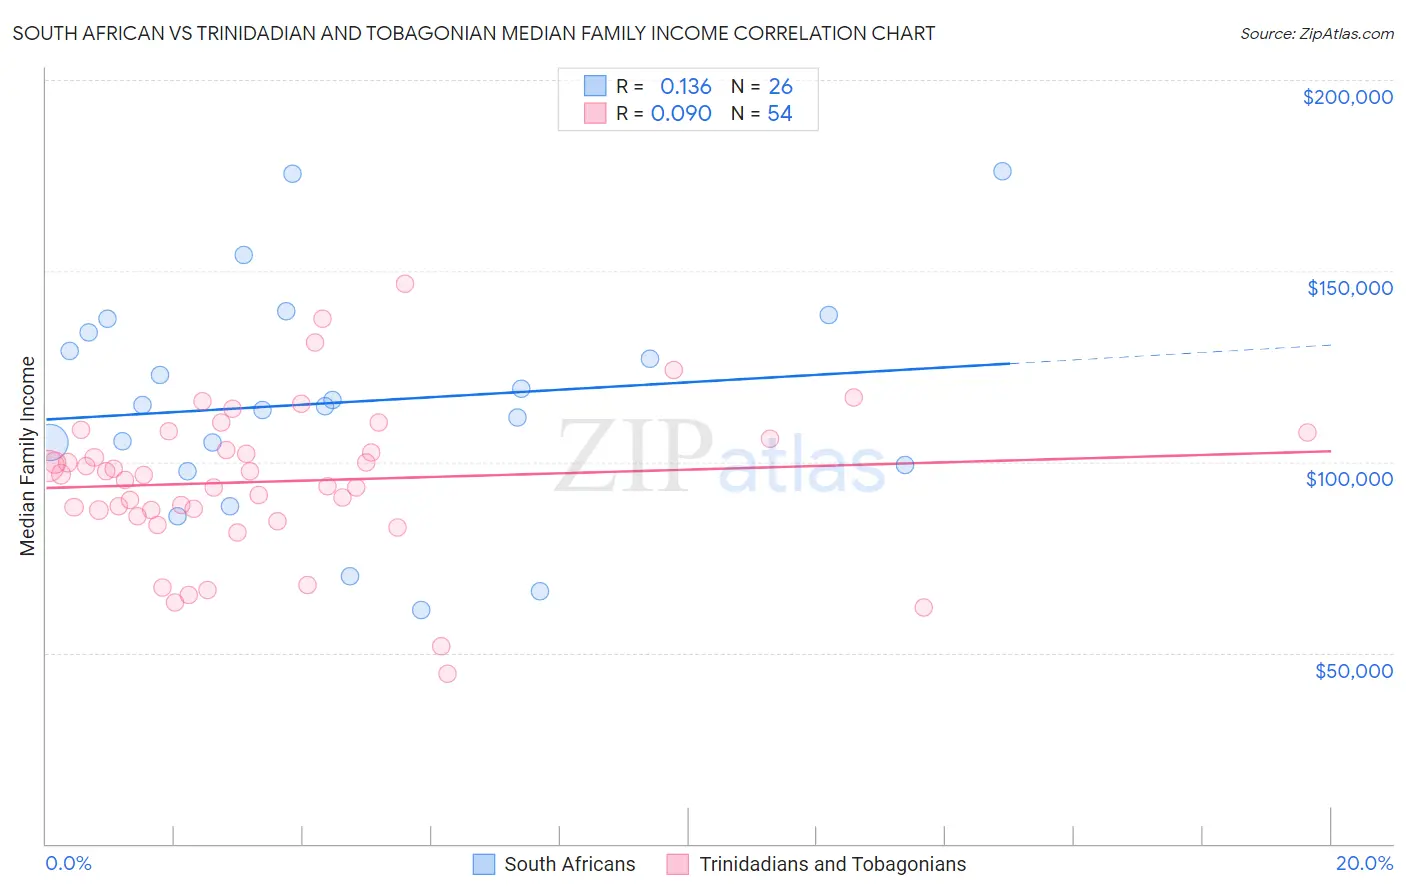 South African vs Trinidadian and Tobagonian Median Family Income